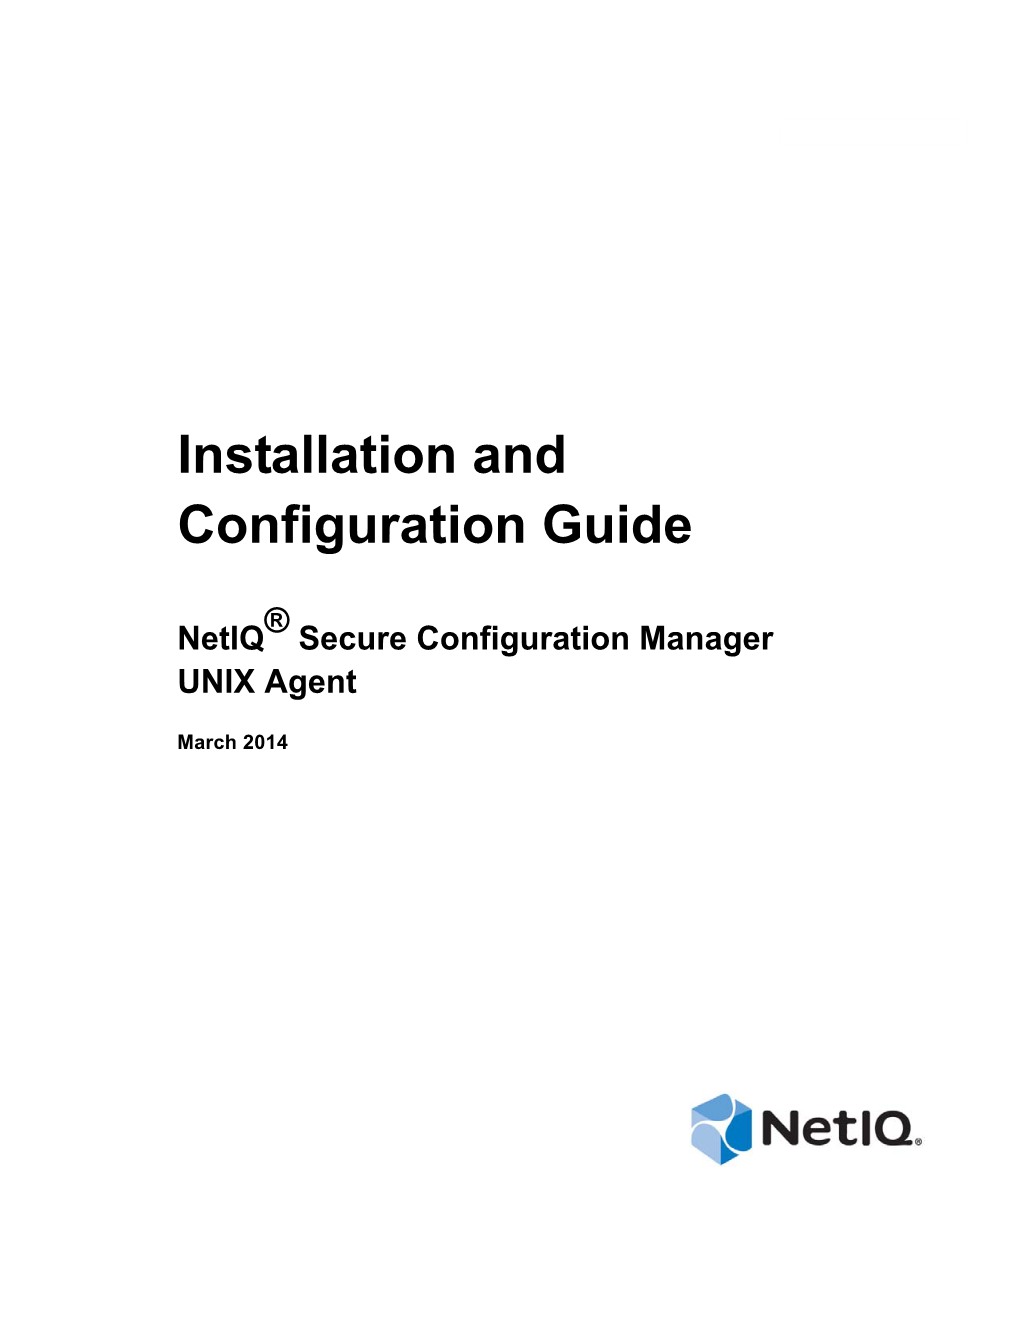 Installation and Configuration Guide for Netiq Secure Configuration Manager UNIX Agent About This Book and the Library